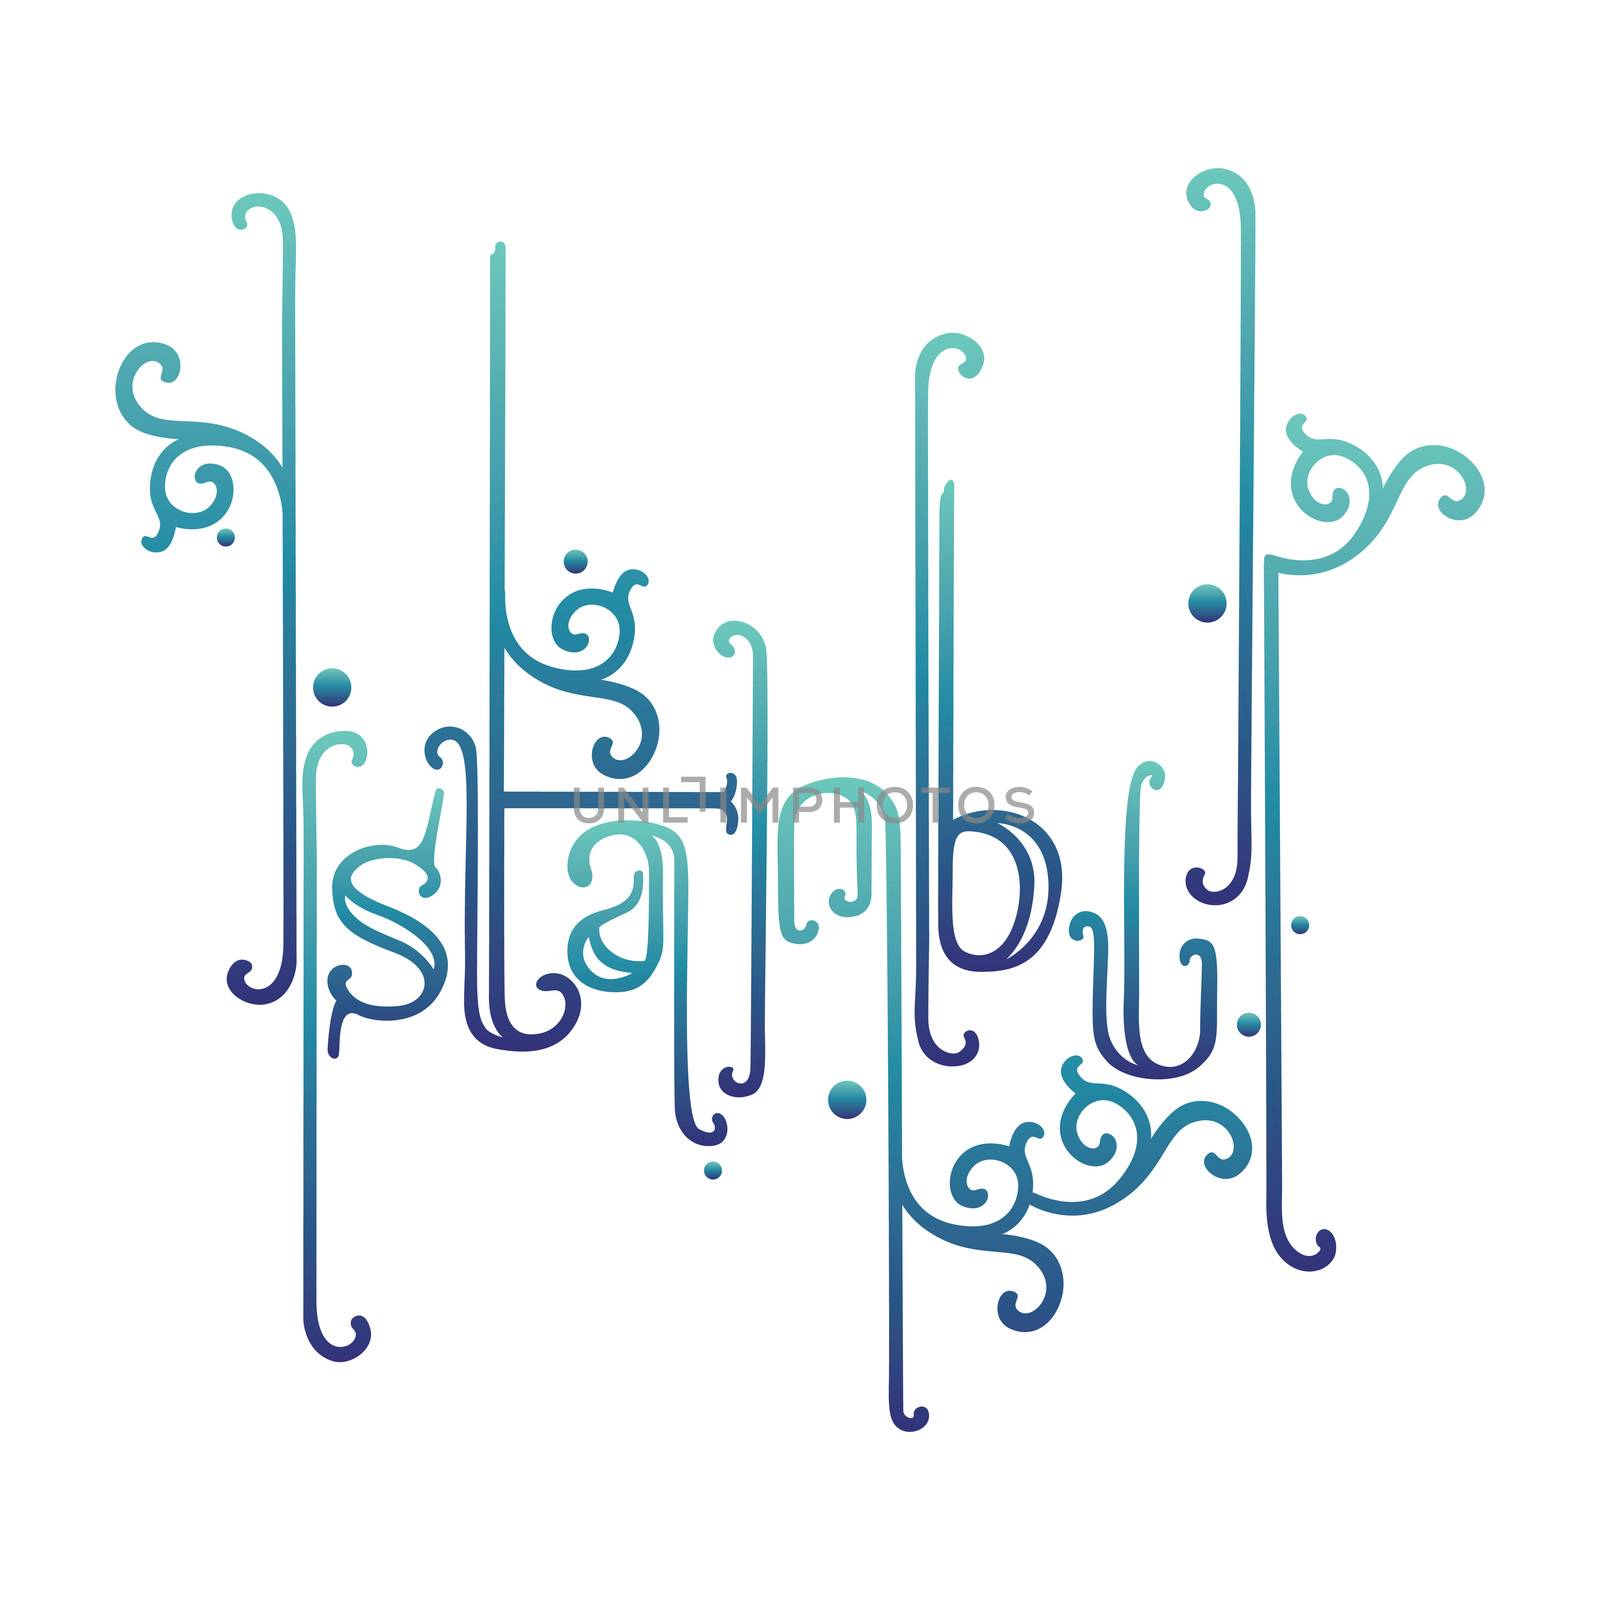 Creative Istanbul typography, digital custom lettering with flourishes